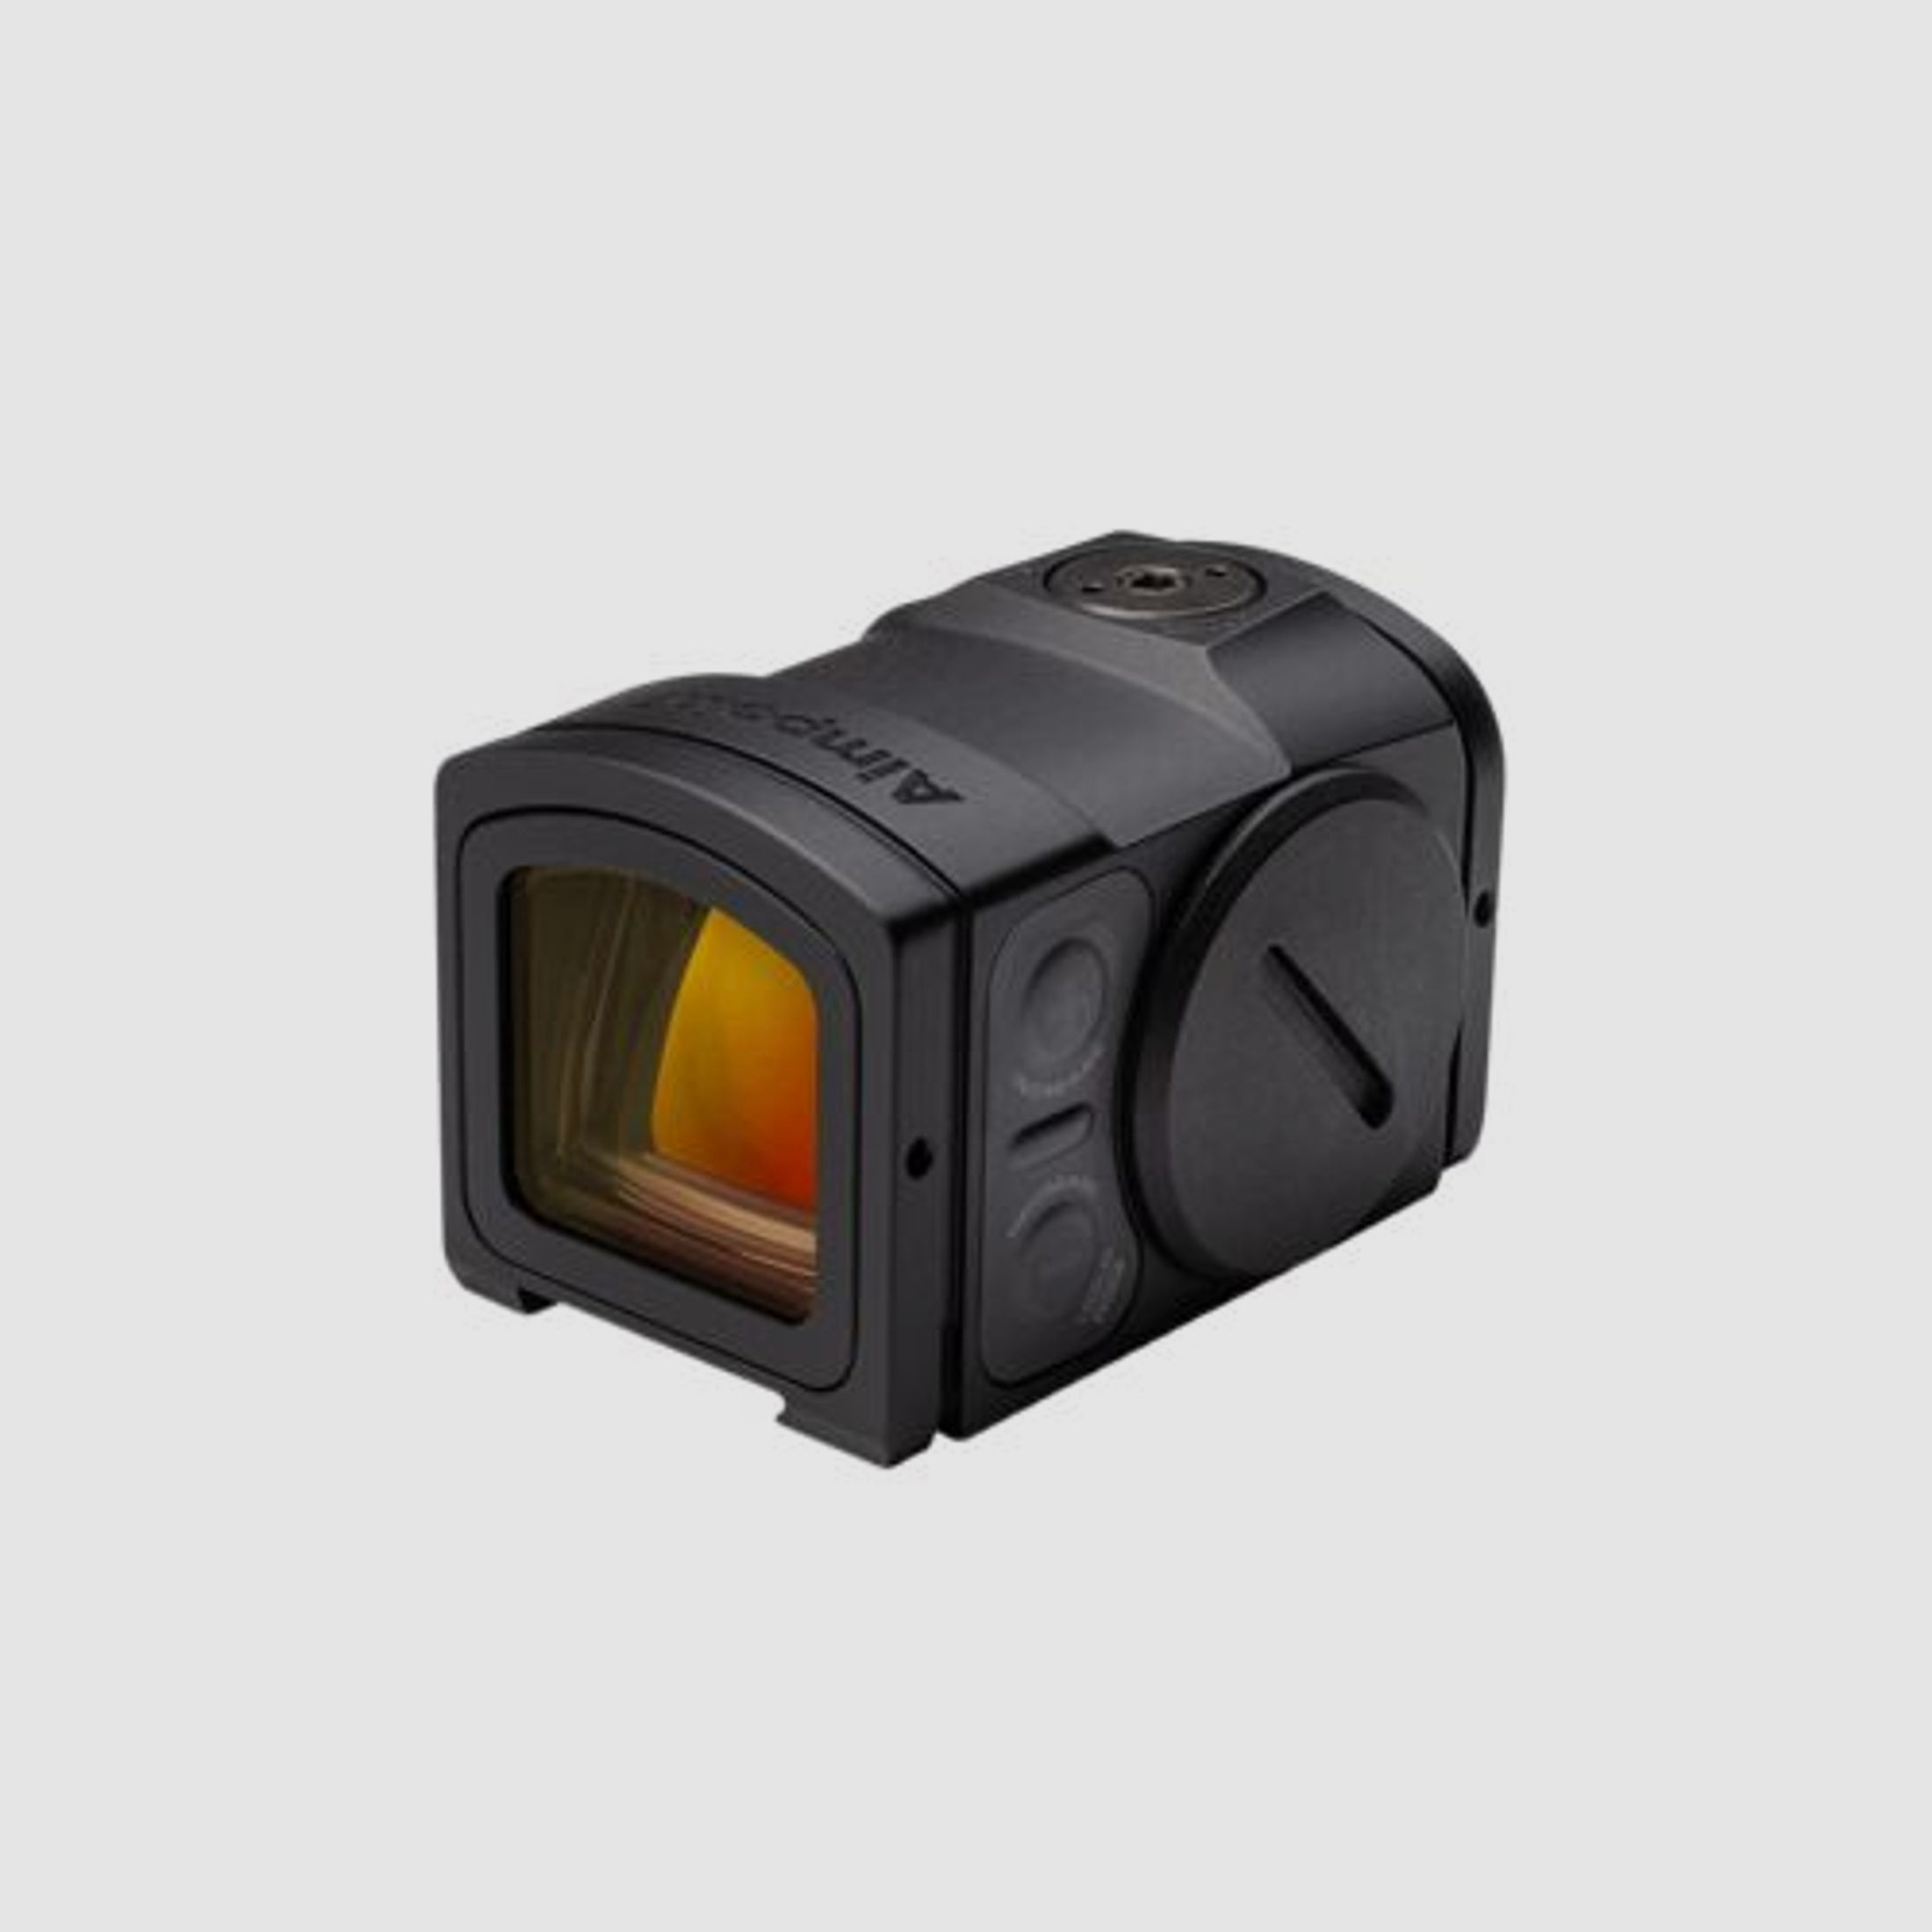 Aimpoint Rotpunktvisier Acro C-2 3,5 MOA incl. Adapter f?r Acro Interface